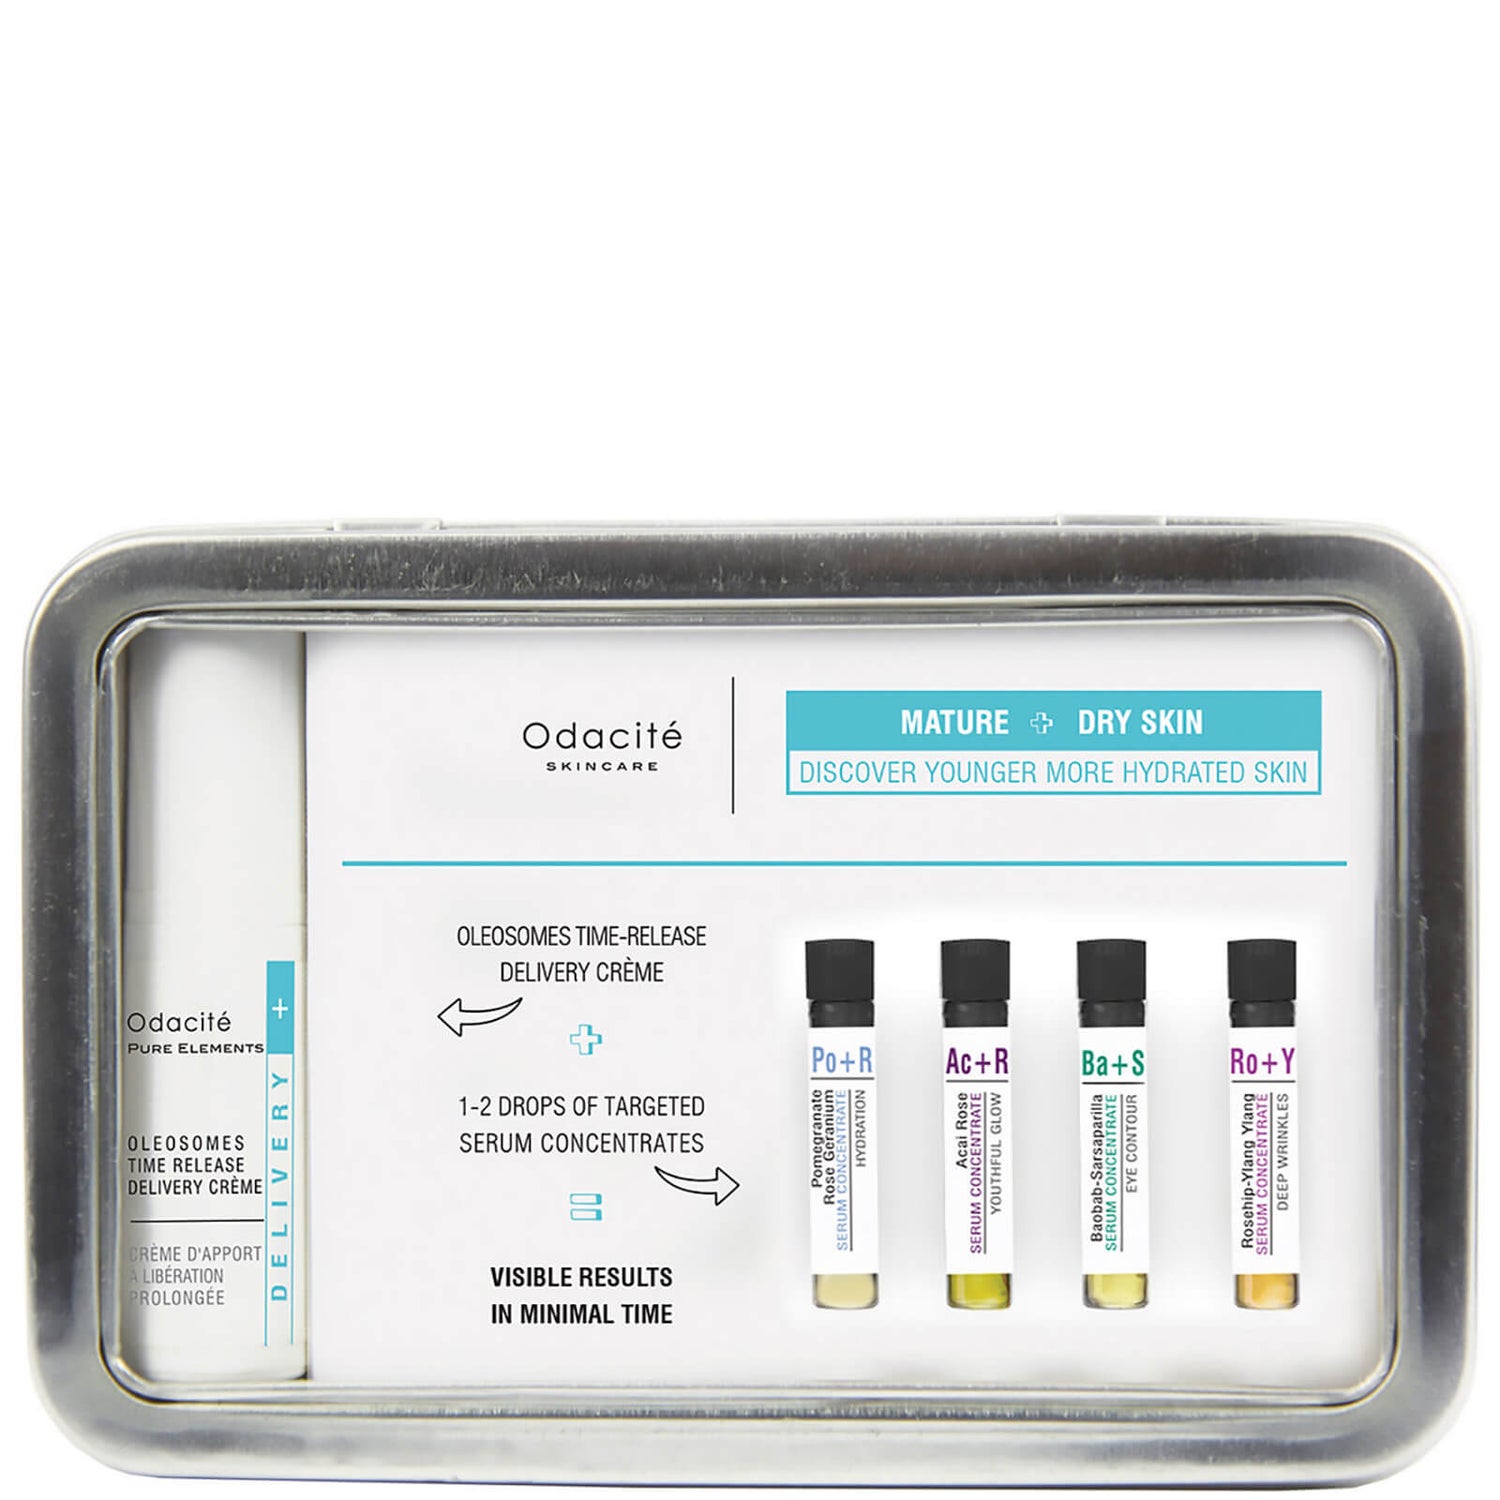 Odacité Pure Elements Discovery Kit - Mature + Dry Skin